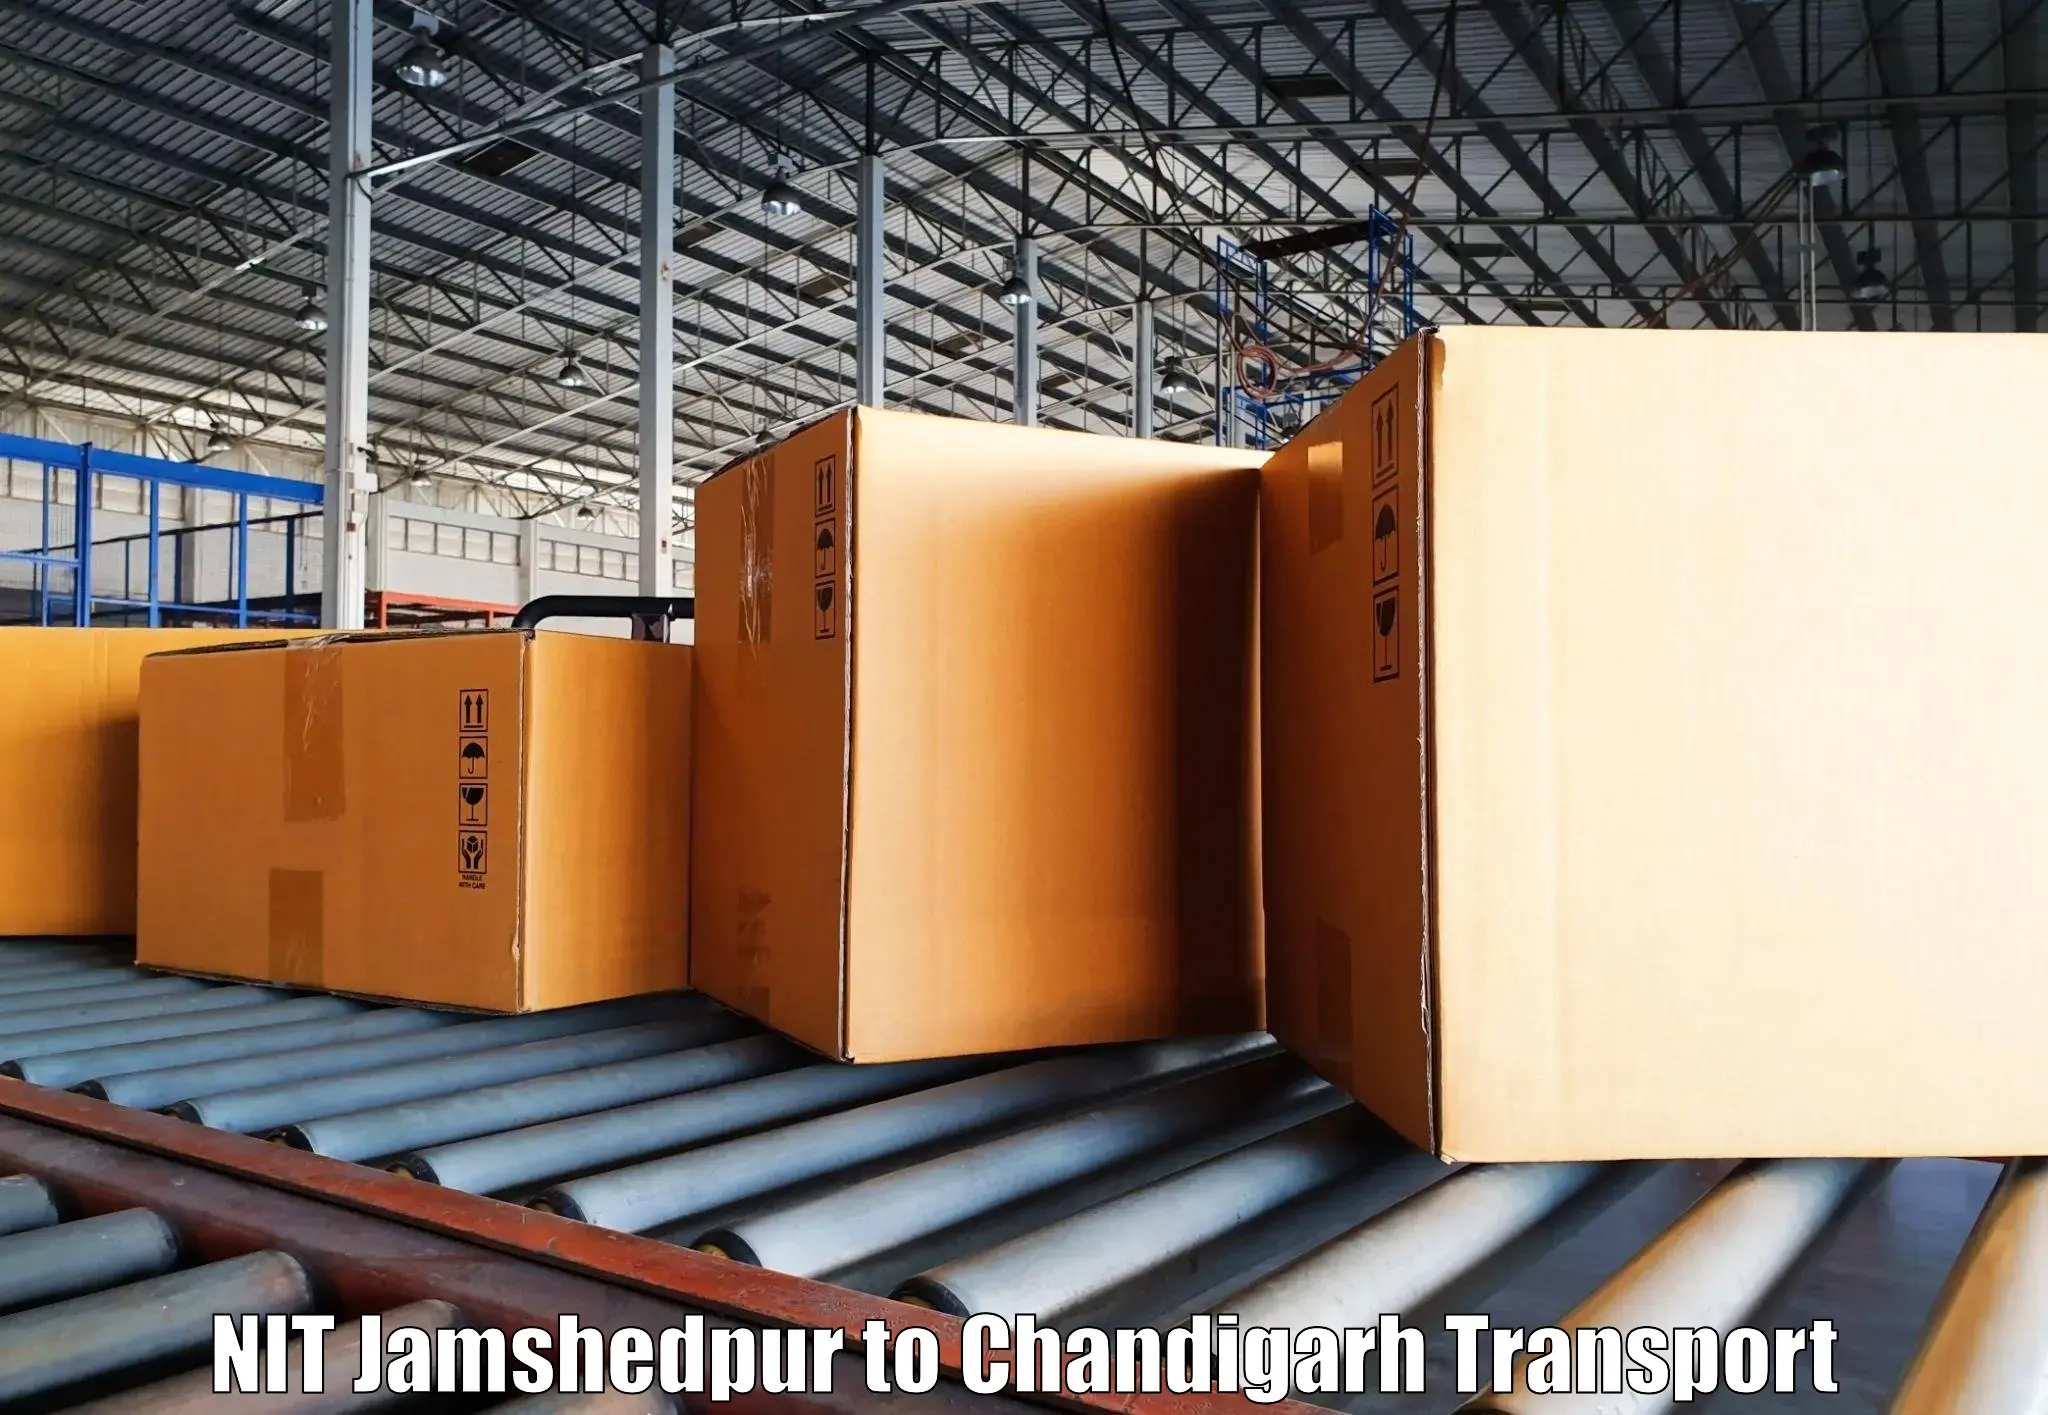 Express transport services NIT Jamshedpur to Chandigarh